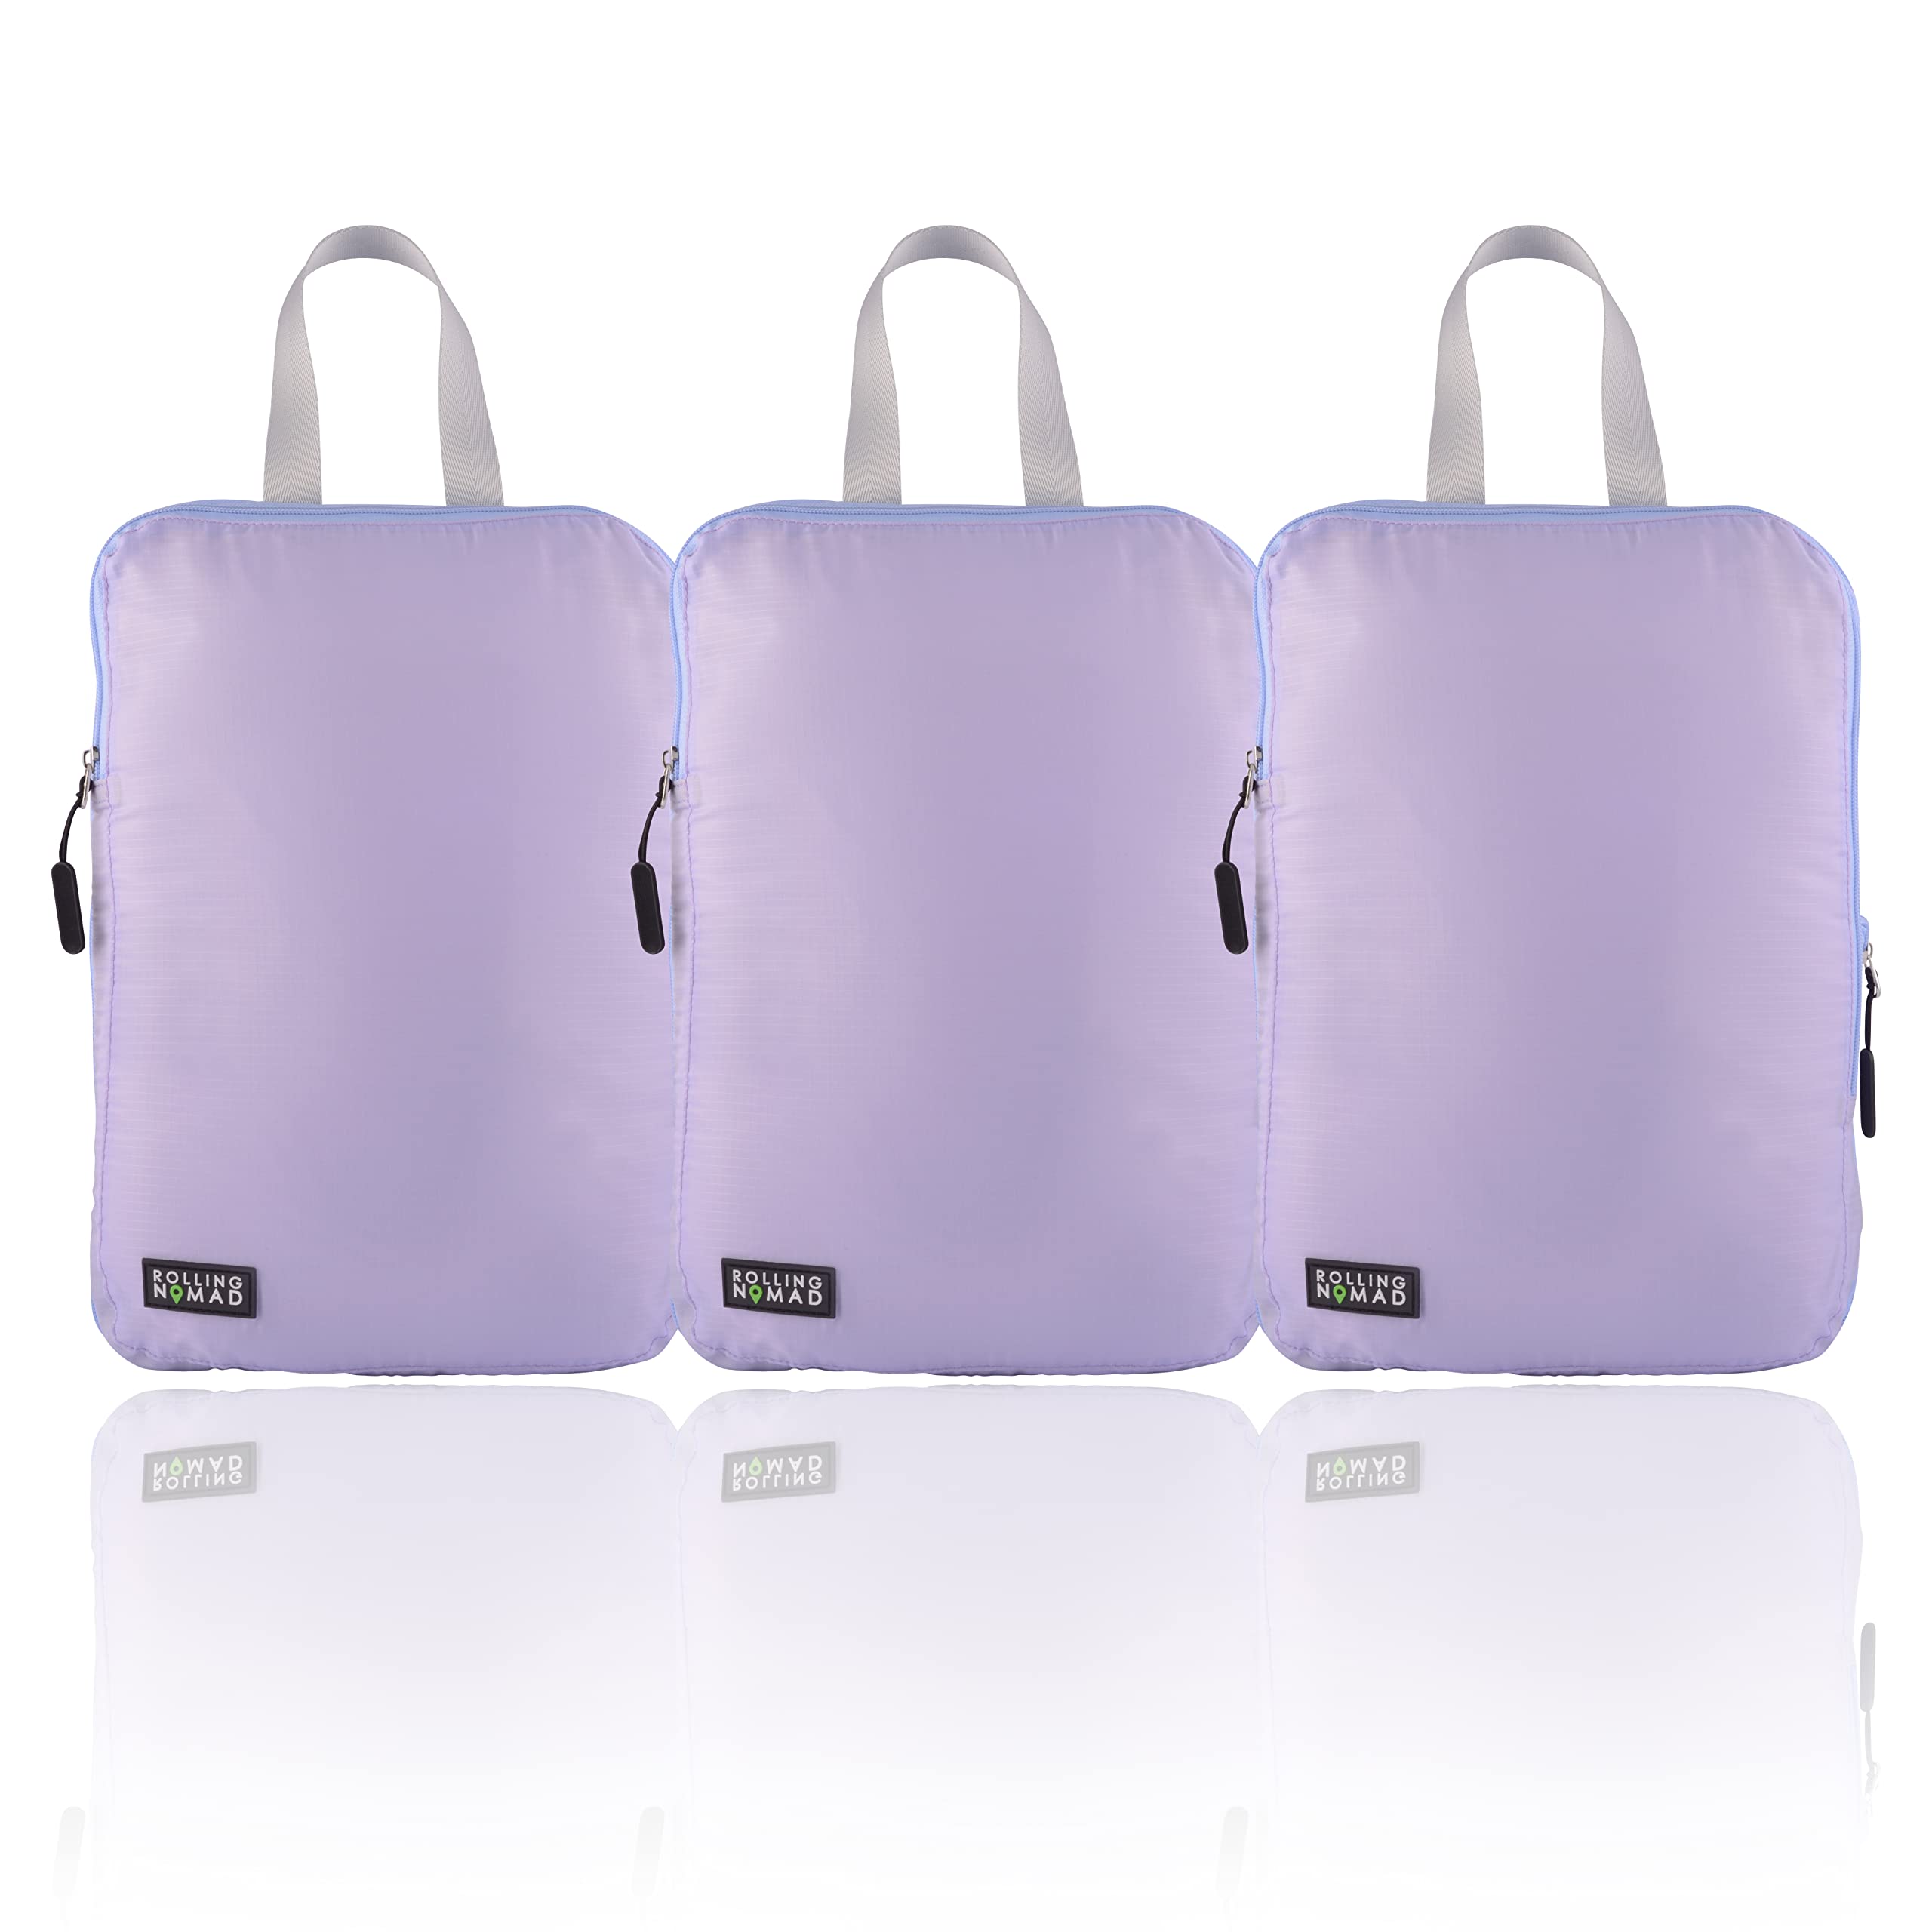 Compression Packing Cubes - 3 Pack Large Purple Luggage Travel Carry Must Haves, Compressible Suitcase Organizer Bag Set for Suitcases, Traveling, Storage, Clothes, Laundry, Accessories - 9.75x4x13.75  - Very Good